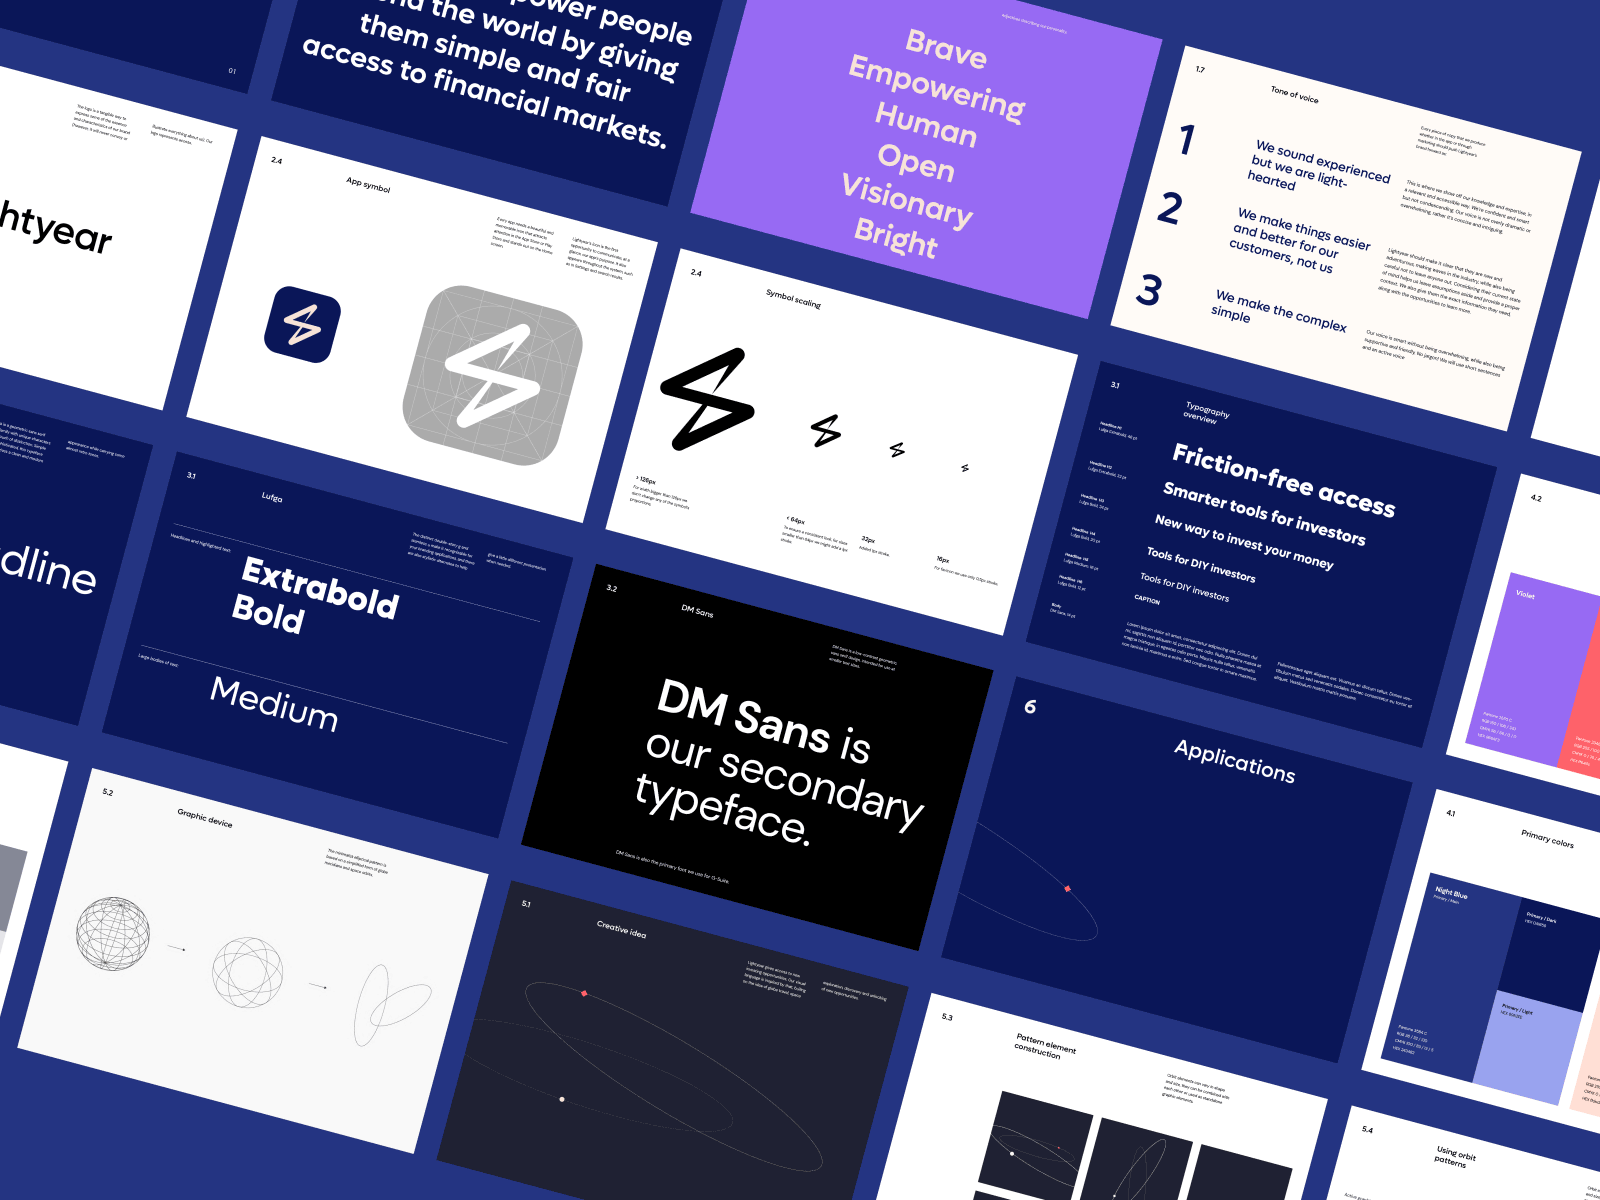 Lightyear - Brand Guidelines animation brand book brand guidelines branding design fintech fintech design guidelines innovative brand logo minimal motion graphics startup startup brand